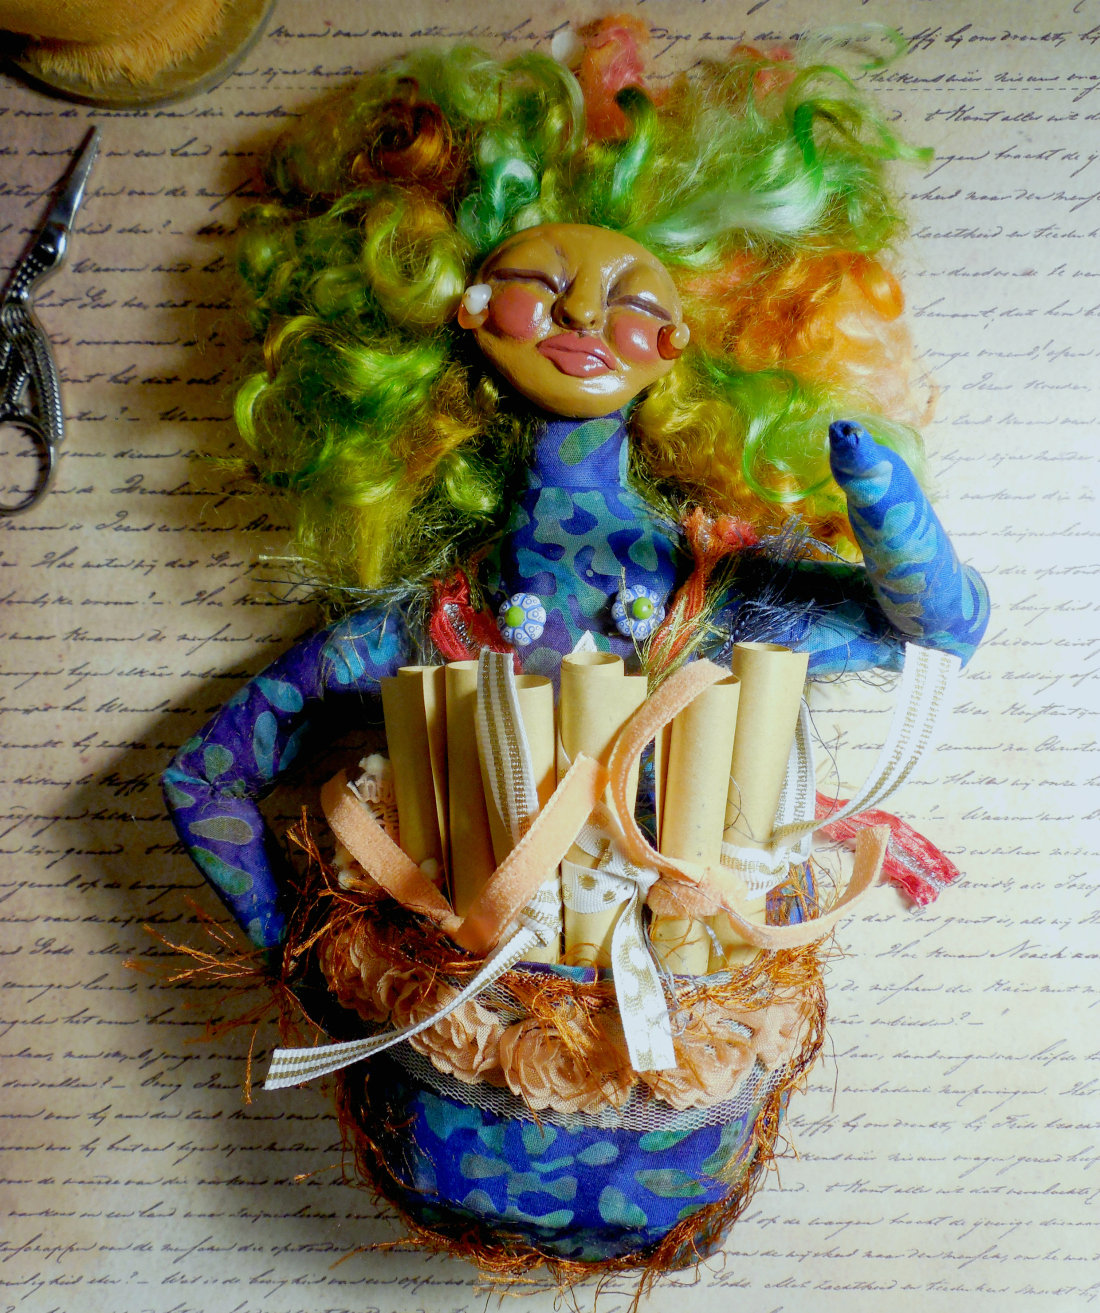 OOAK Cloth and Clay Art Doll for Womens Empowerment with Pink and Green Hair